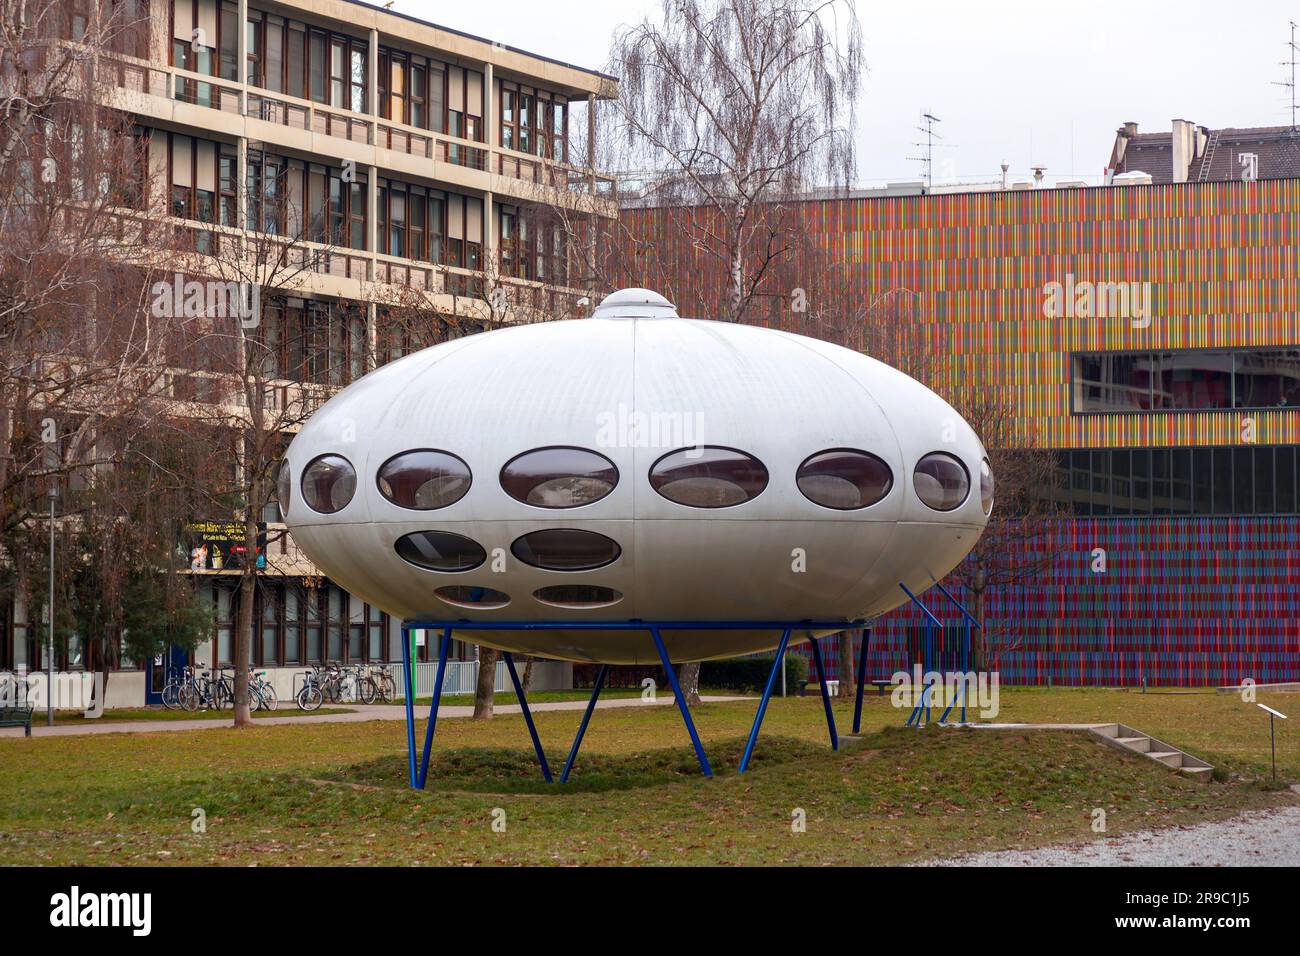 Munich, Germany - DEC 23, 2021: A prototype of a Futuro house from 1968 can be found in Munich next to the Pinakothek der Moderne. UFO shaped futurist Stock Photo